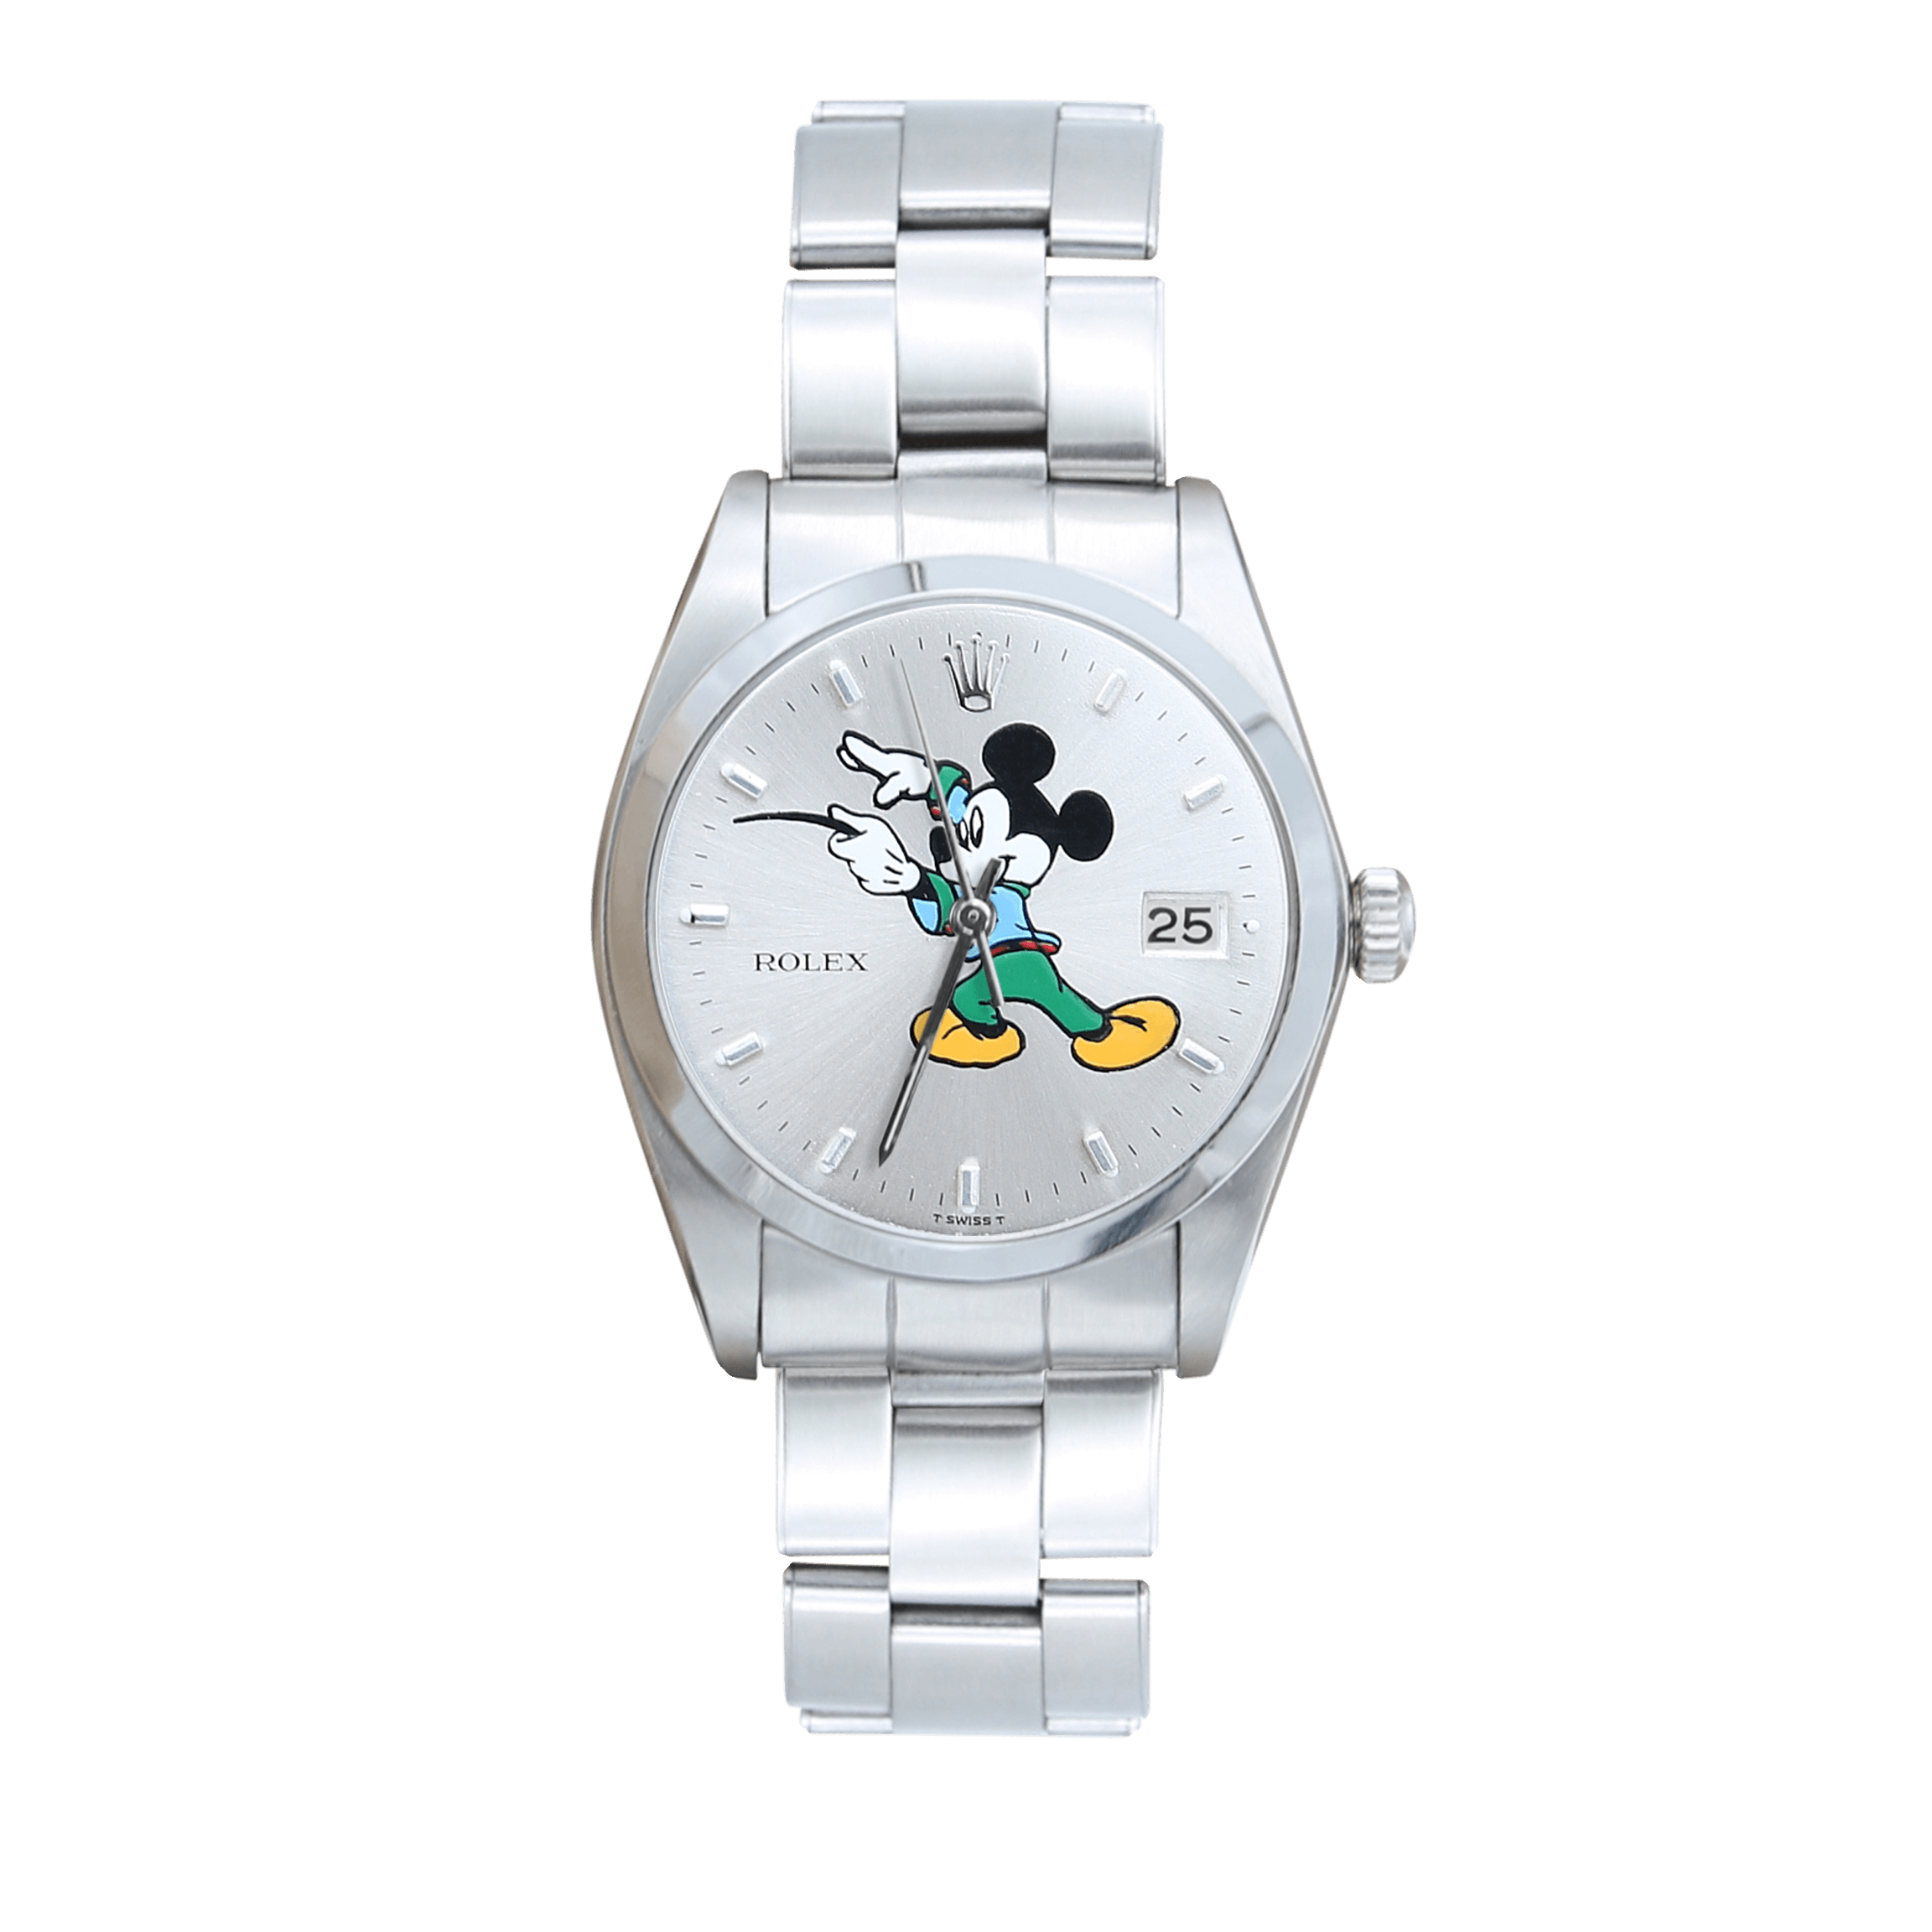 Rolex Precision Date Ref. 6694 Mickey Mouse Musician Silver Dial Oyster Bracelet